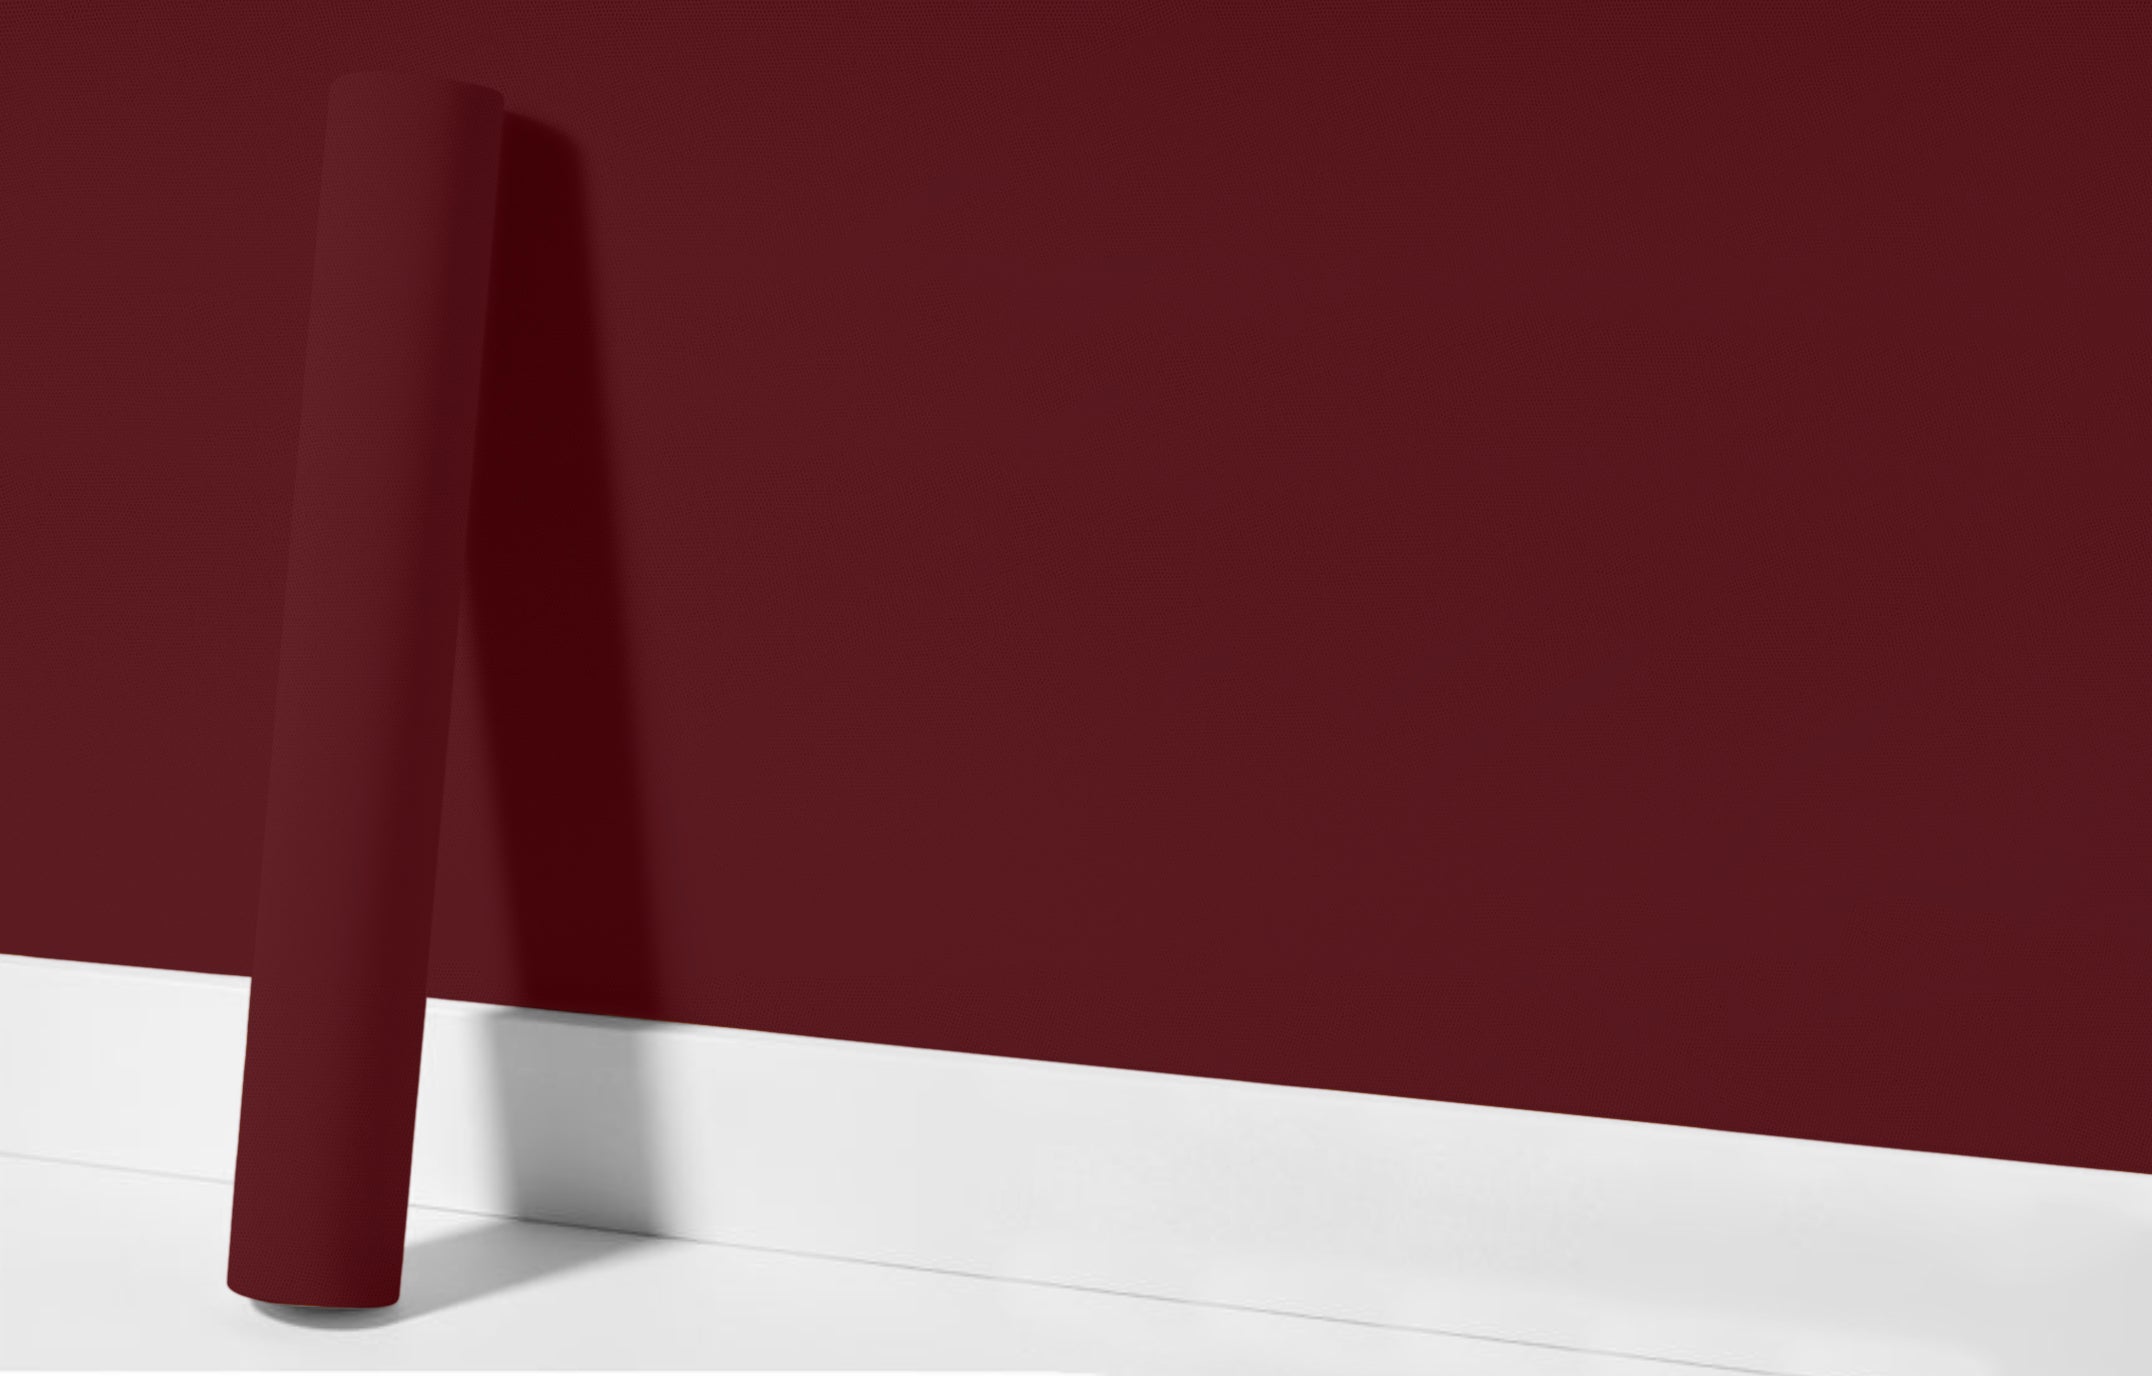 Peel & Stick Removable Re-usable Paint - Color RAL 3005 Wine Red - offRAL™ - RALRAW LLC, USA